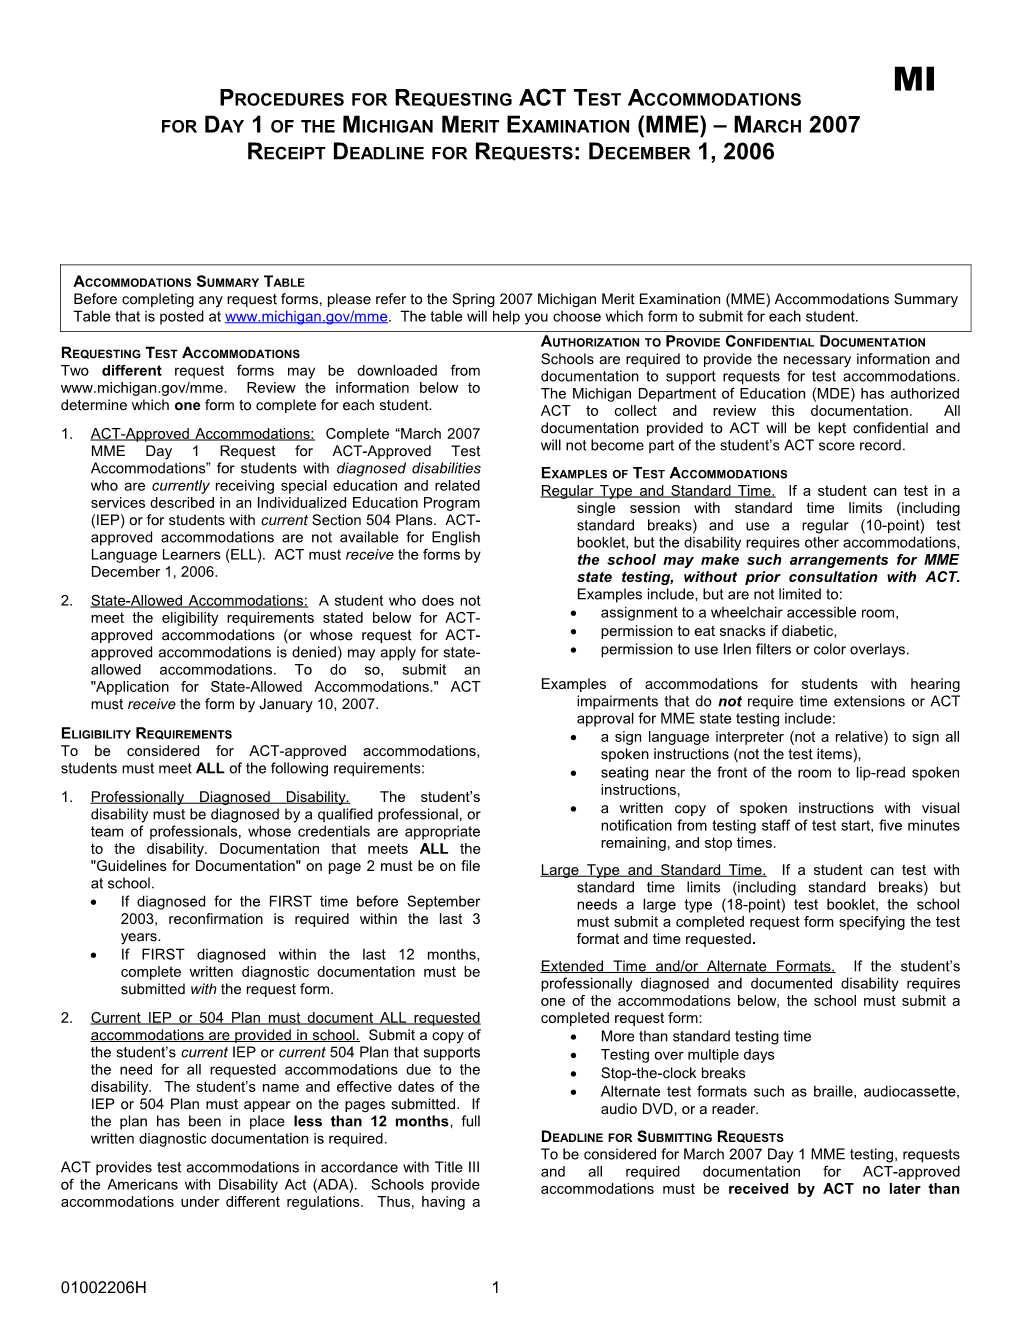 2000-2001 Request for ACT Assessment Test Accommodations